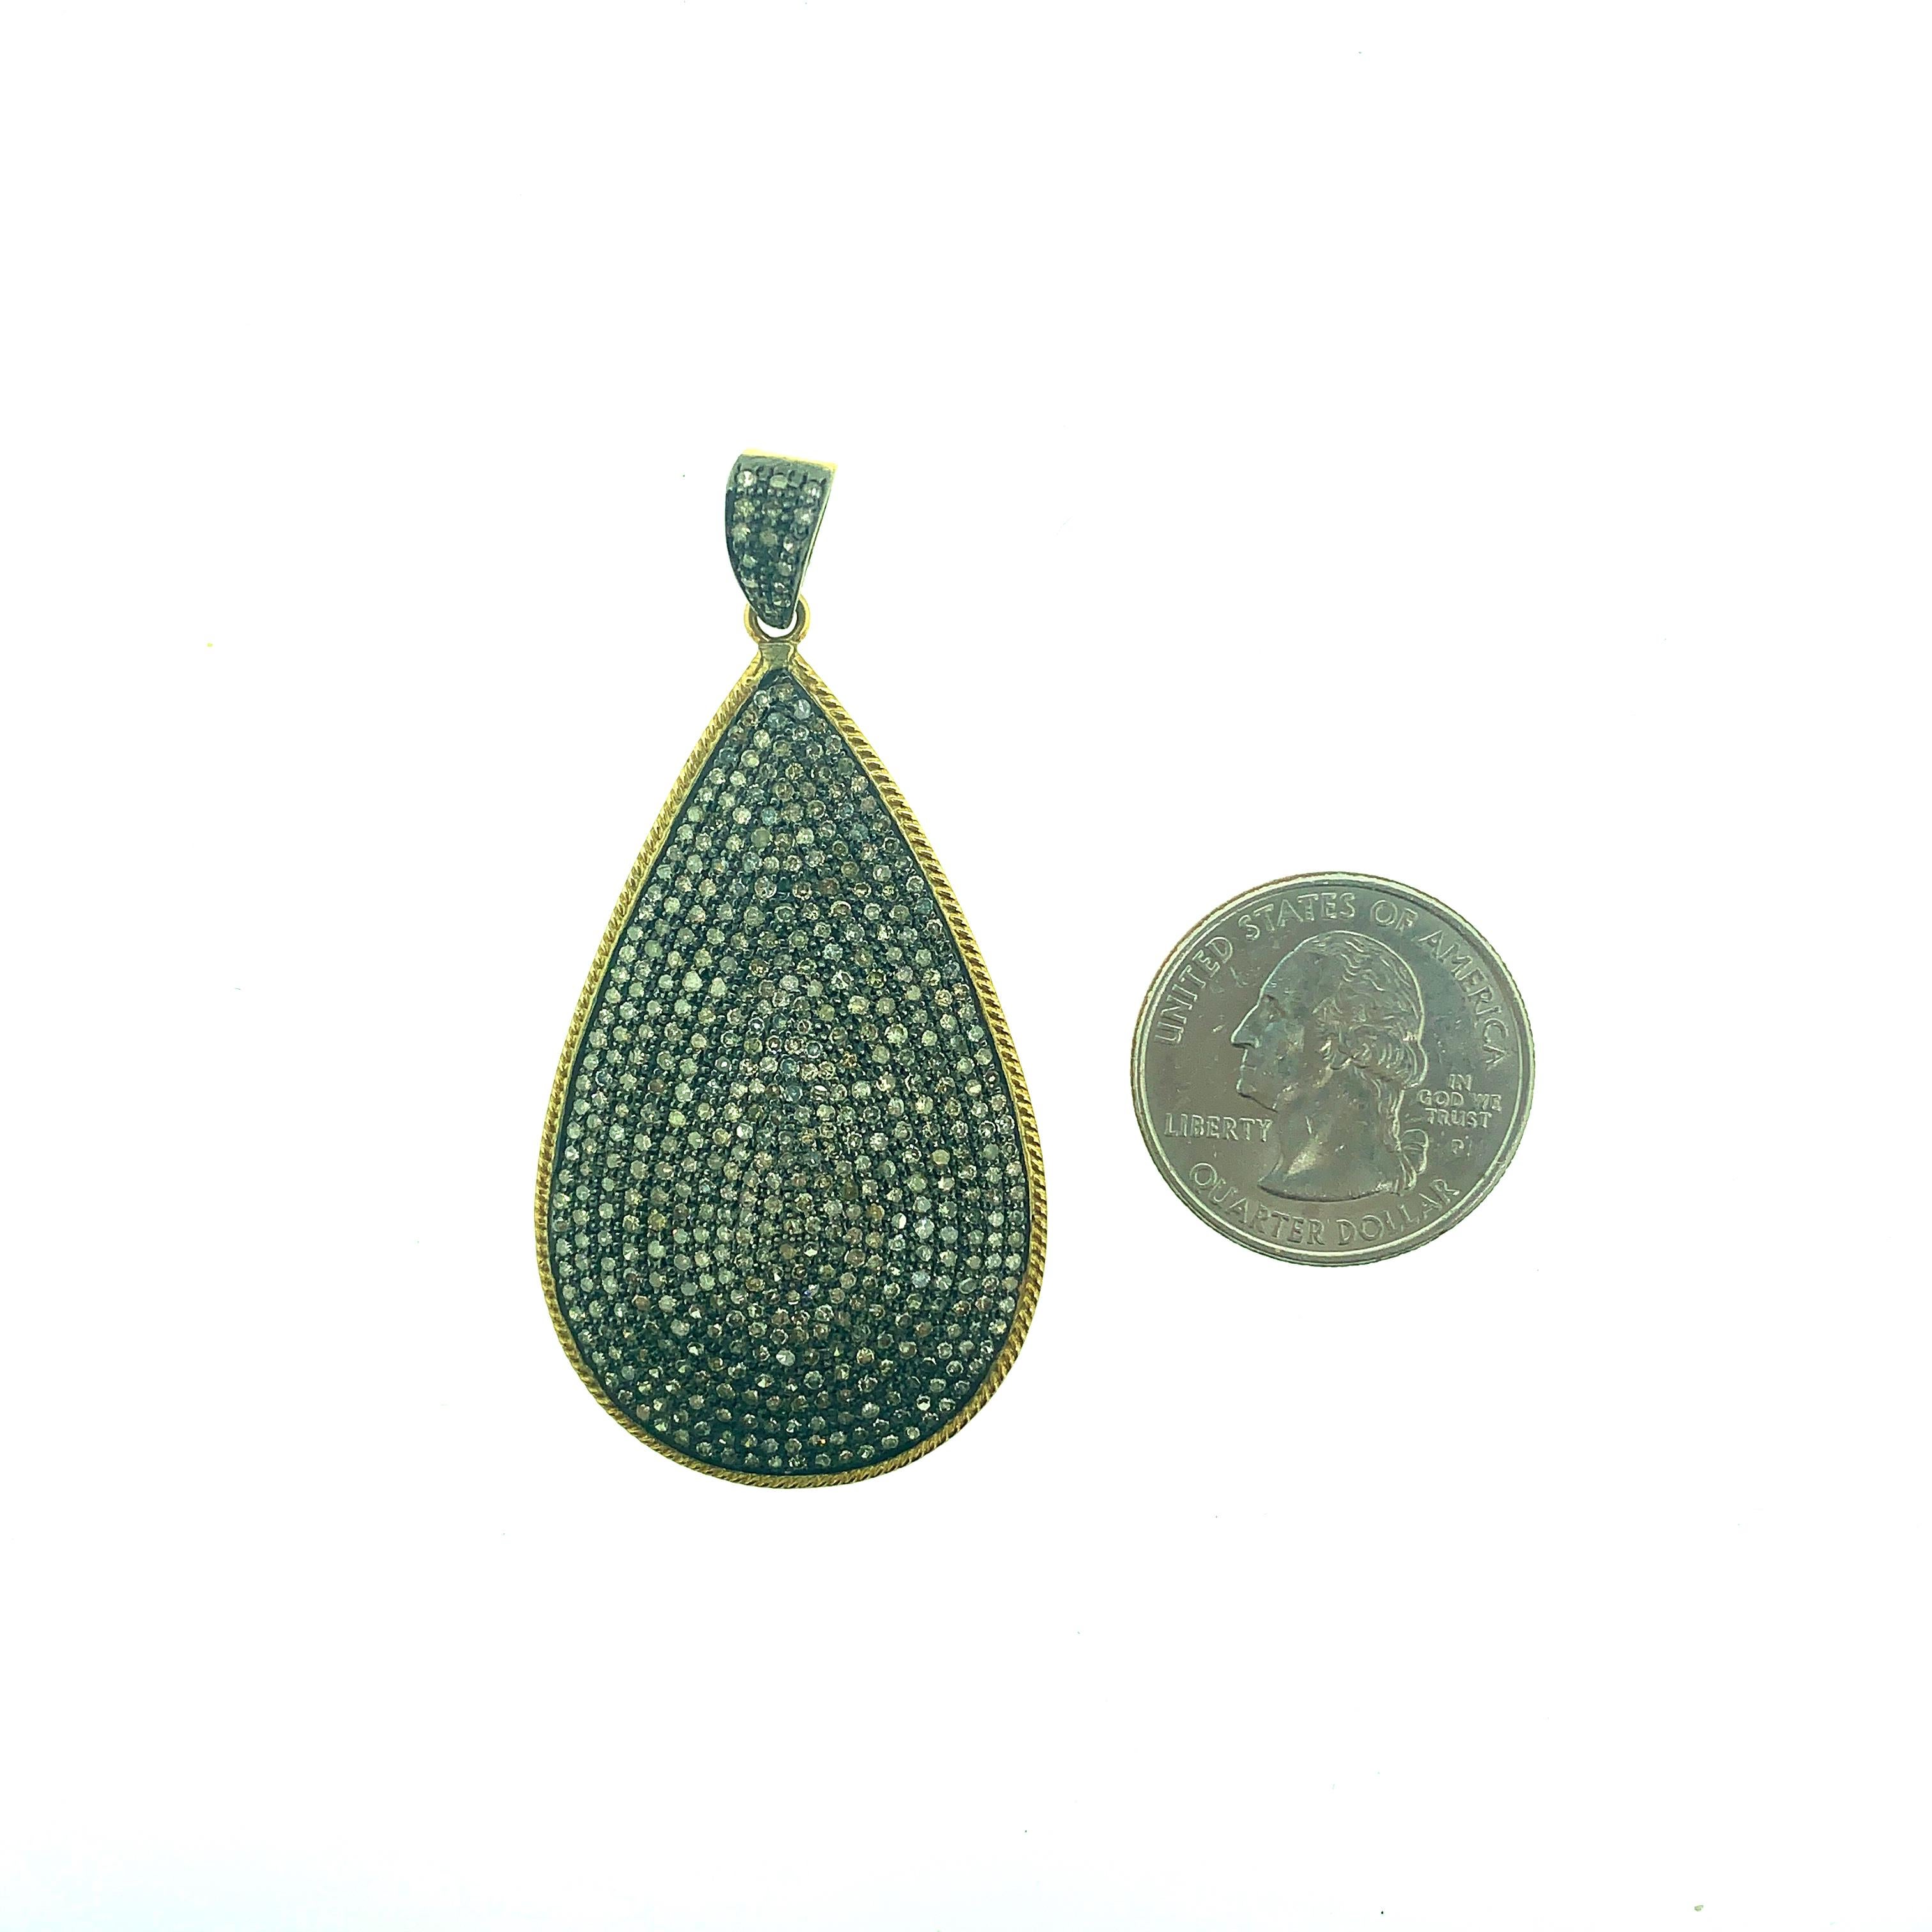 5.40 ct Pave Champagne Diamond Teardrop Pendant set in Oxidized Sterling Silver surrounded by 14KT Gold rim and back of bail in 14KT Gold. This 2.5 Inch long (including bail) is made in India. 
Diamonds - 5.40 ct Champagne Diamonds
Dimension : 2.5